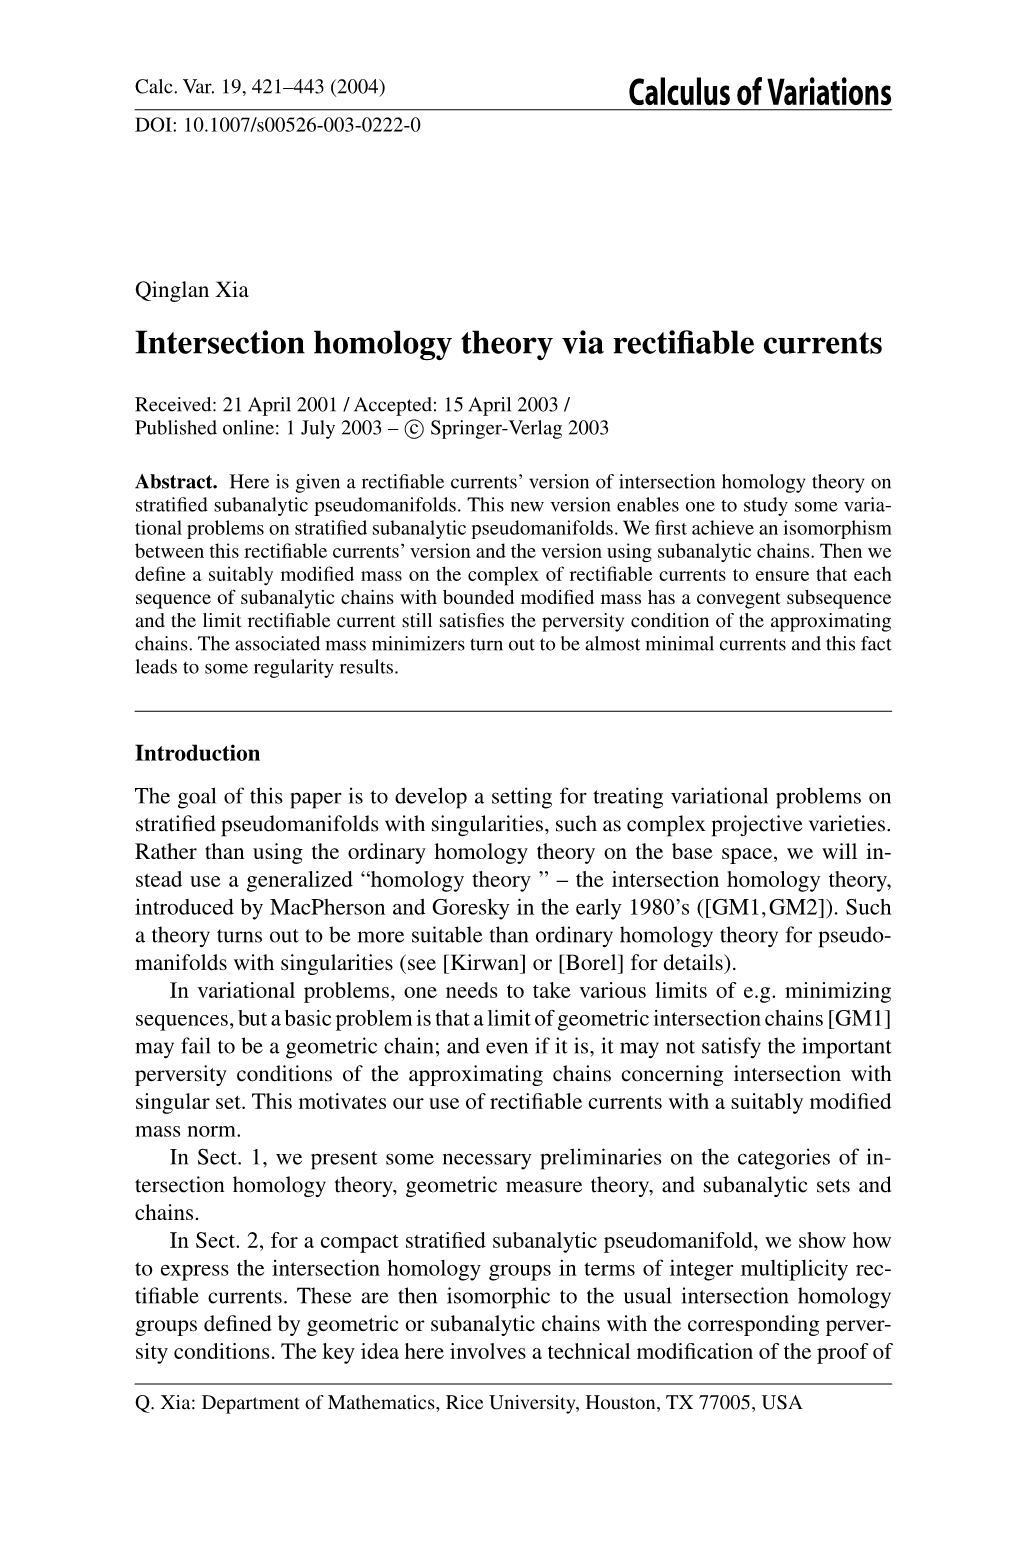 Intersection Homology Theory Via Rectifiable Currents